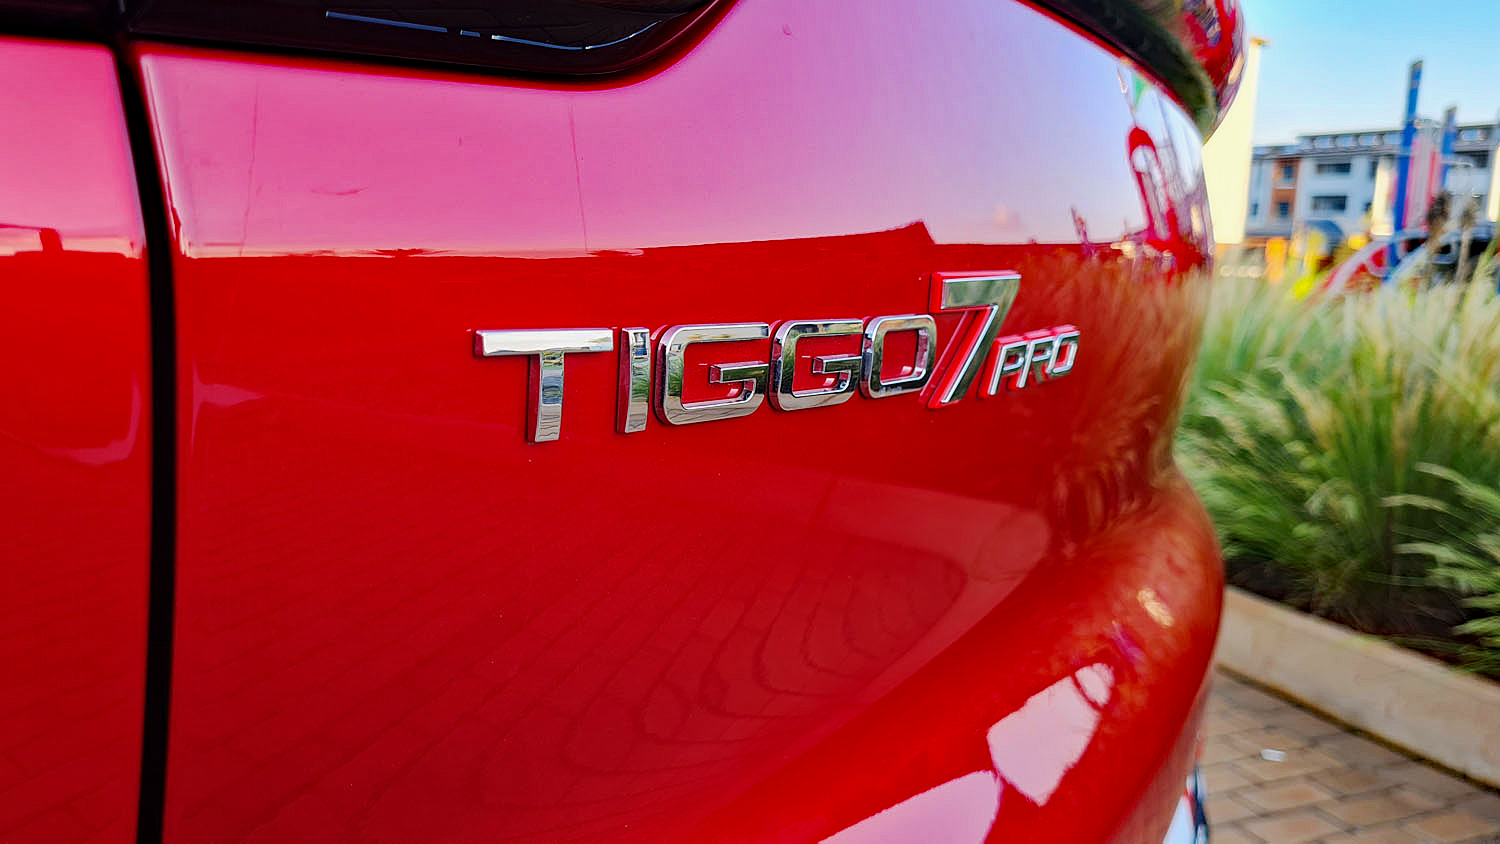 chery, chery tiggo 7 pro, chery tiggo 7 pro review – this is why affordable chinese cars are dominating